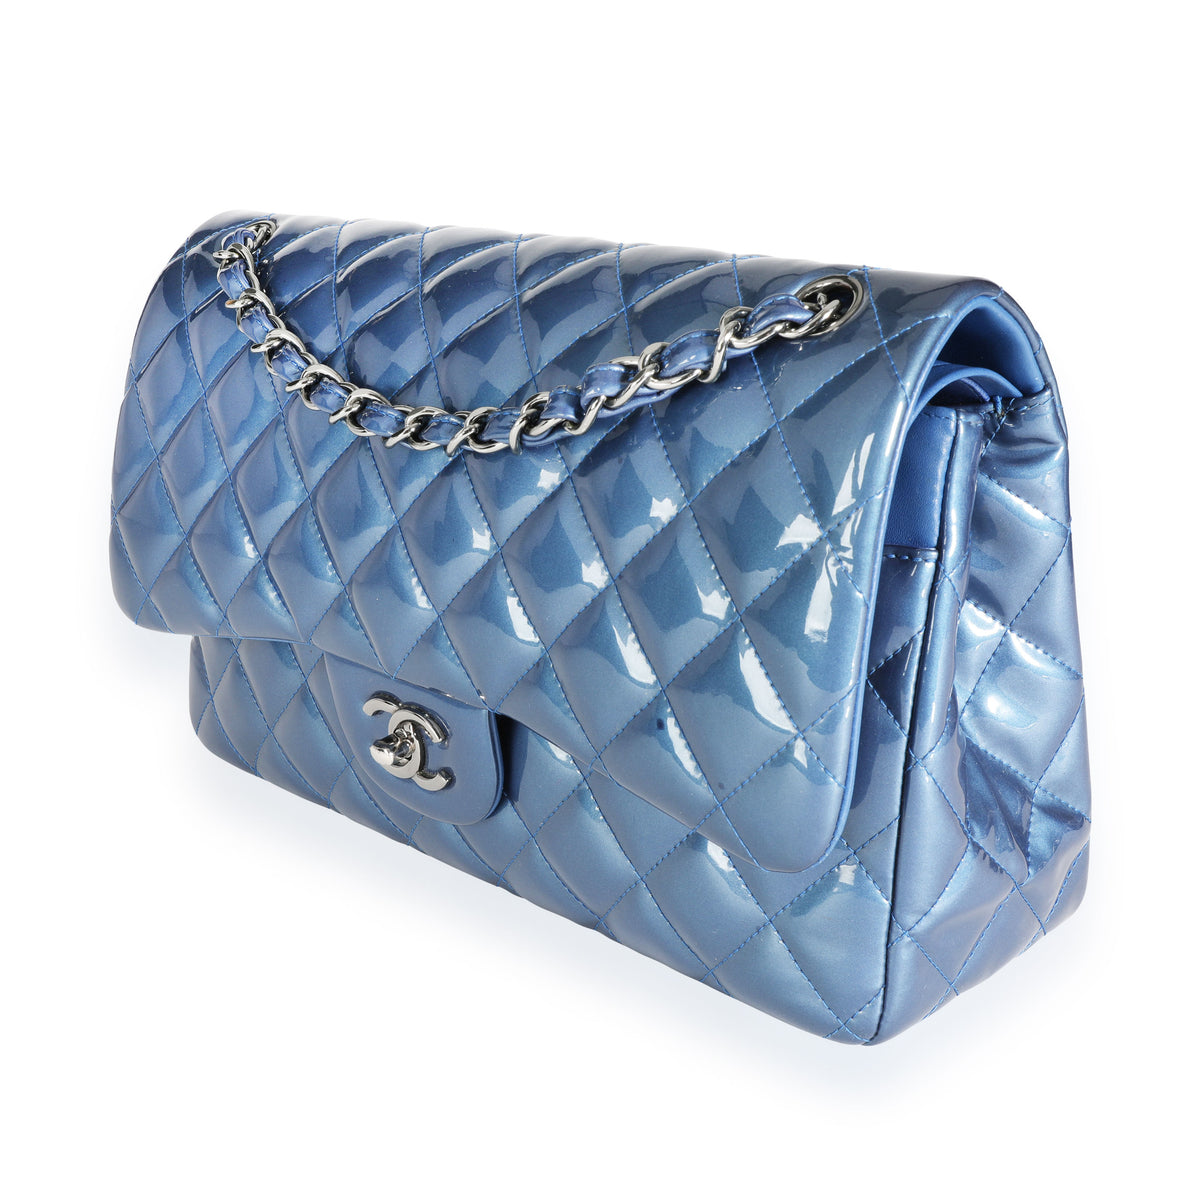 Chanel Iridescent Blue Quilted Lambskin Classic Double Flap Medium